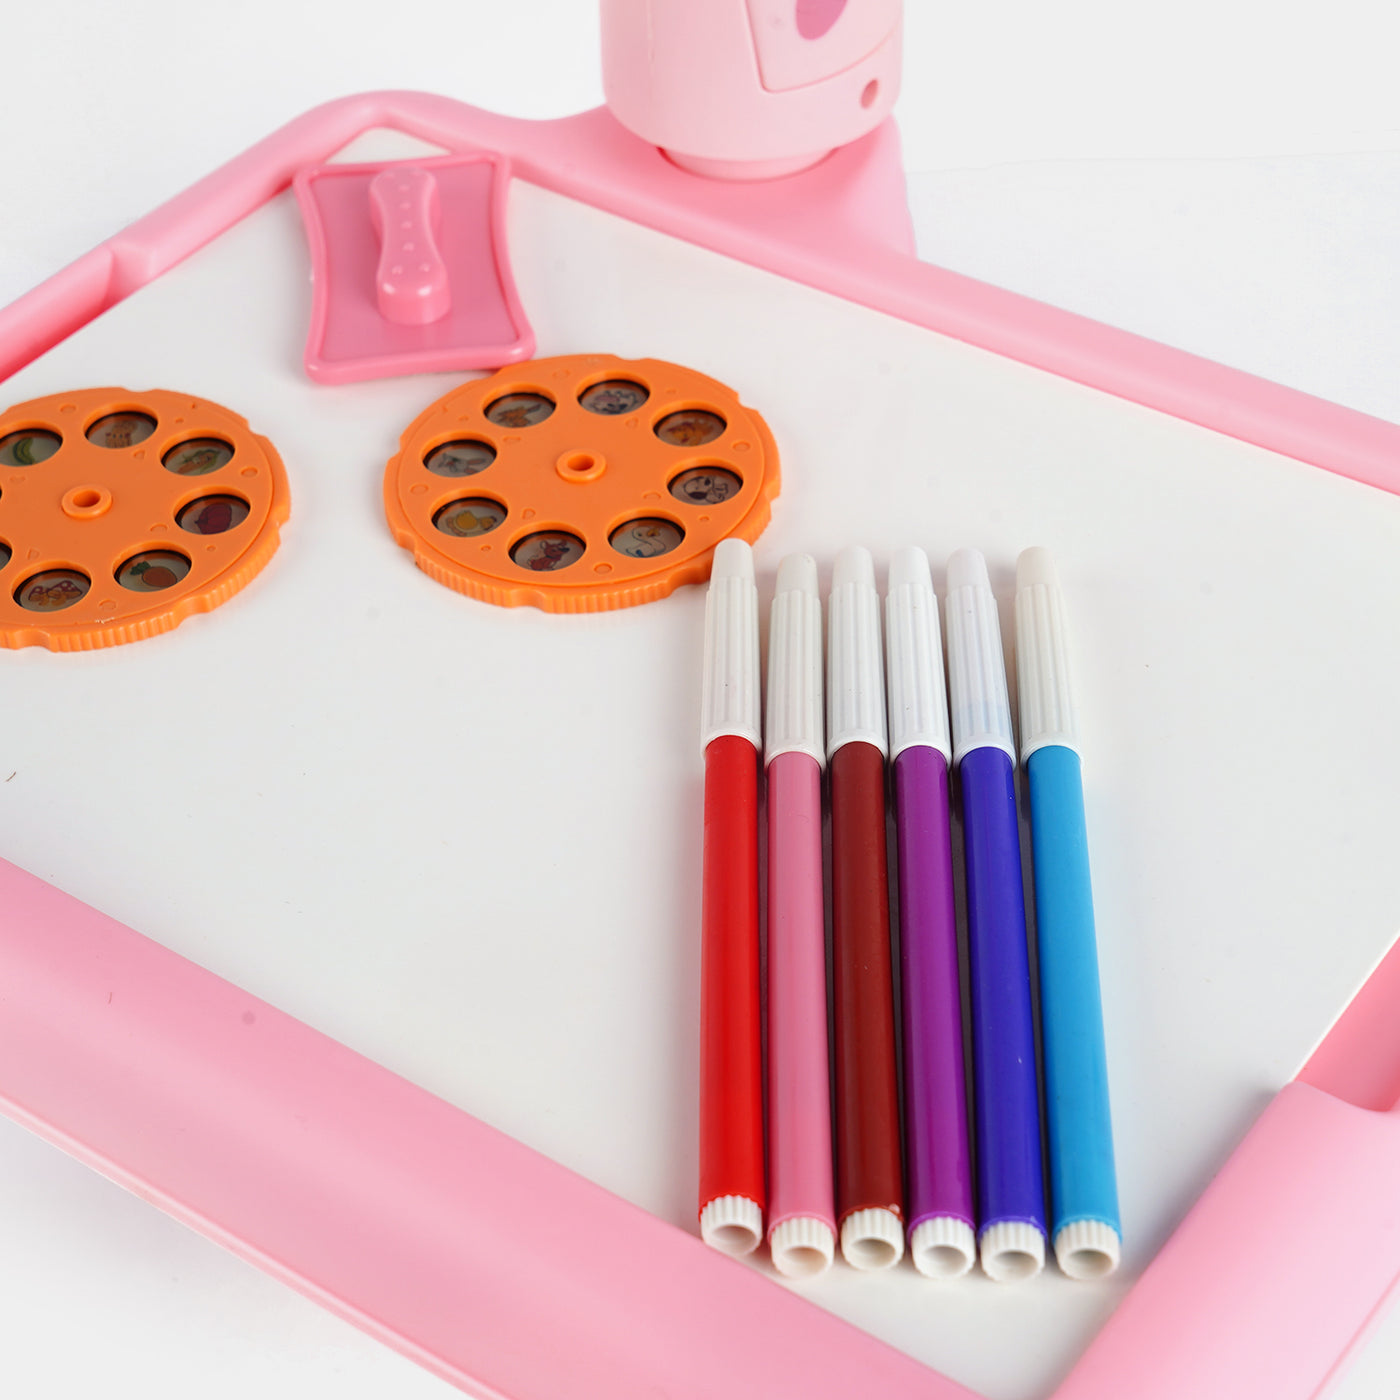 PROJECTION DRAWING TABLE BOARD FOR KIDS